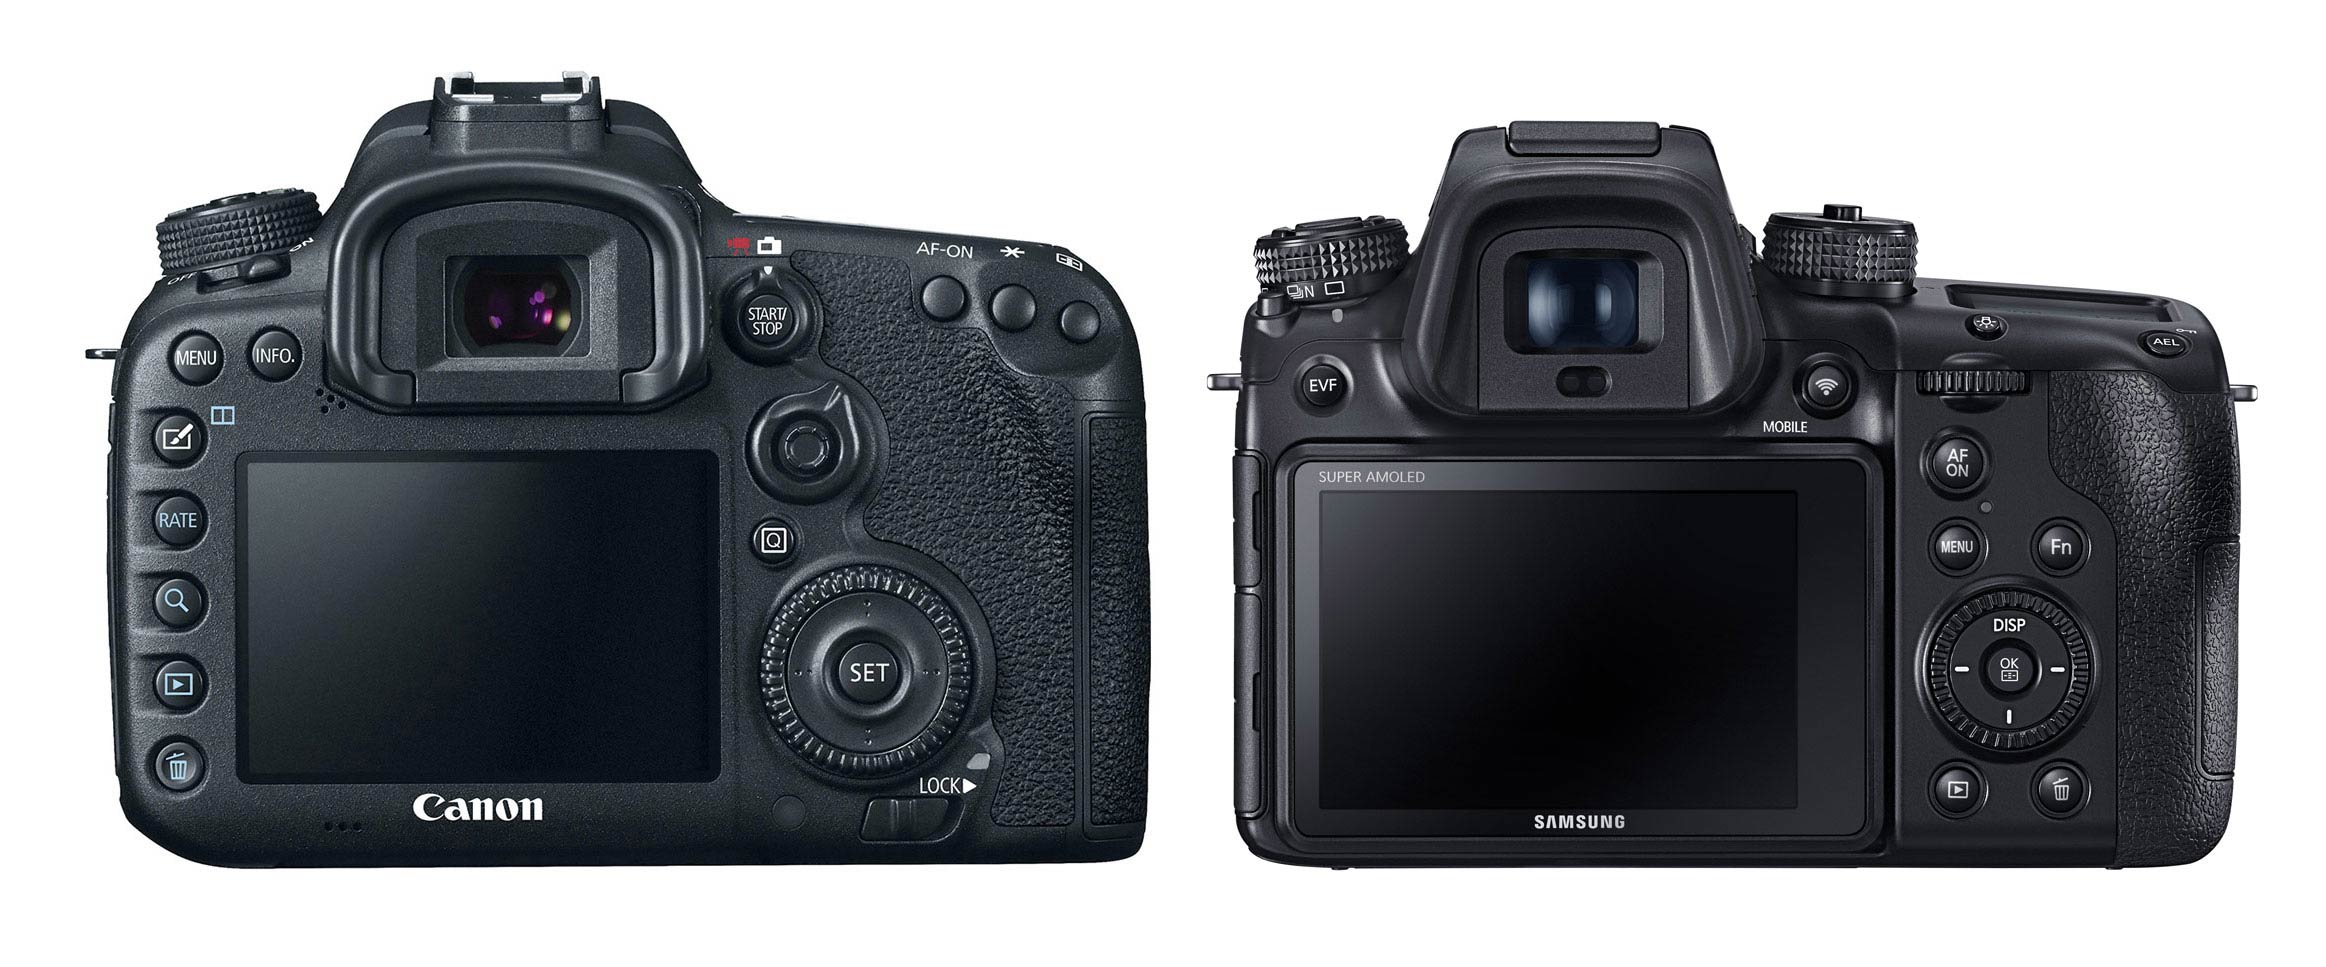 rear view of Canon 7D Mark II and Samsung NX1